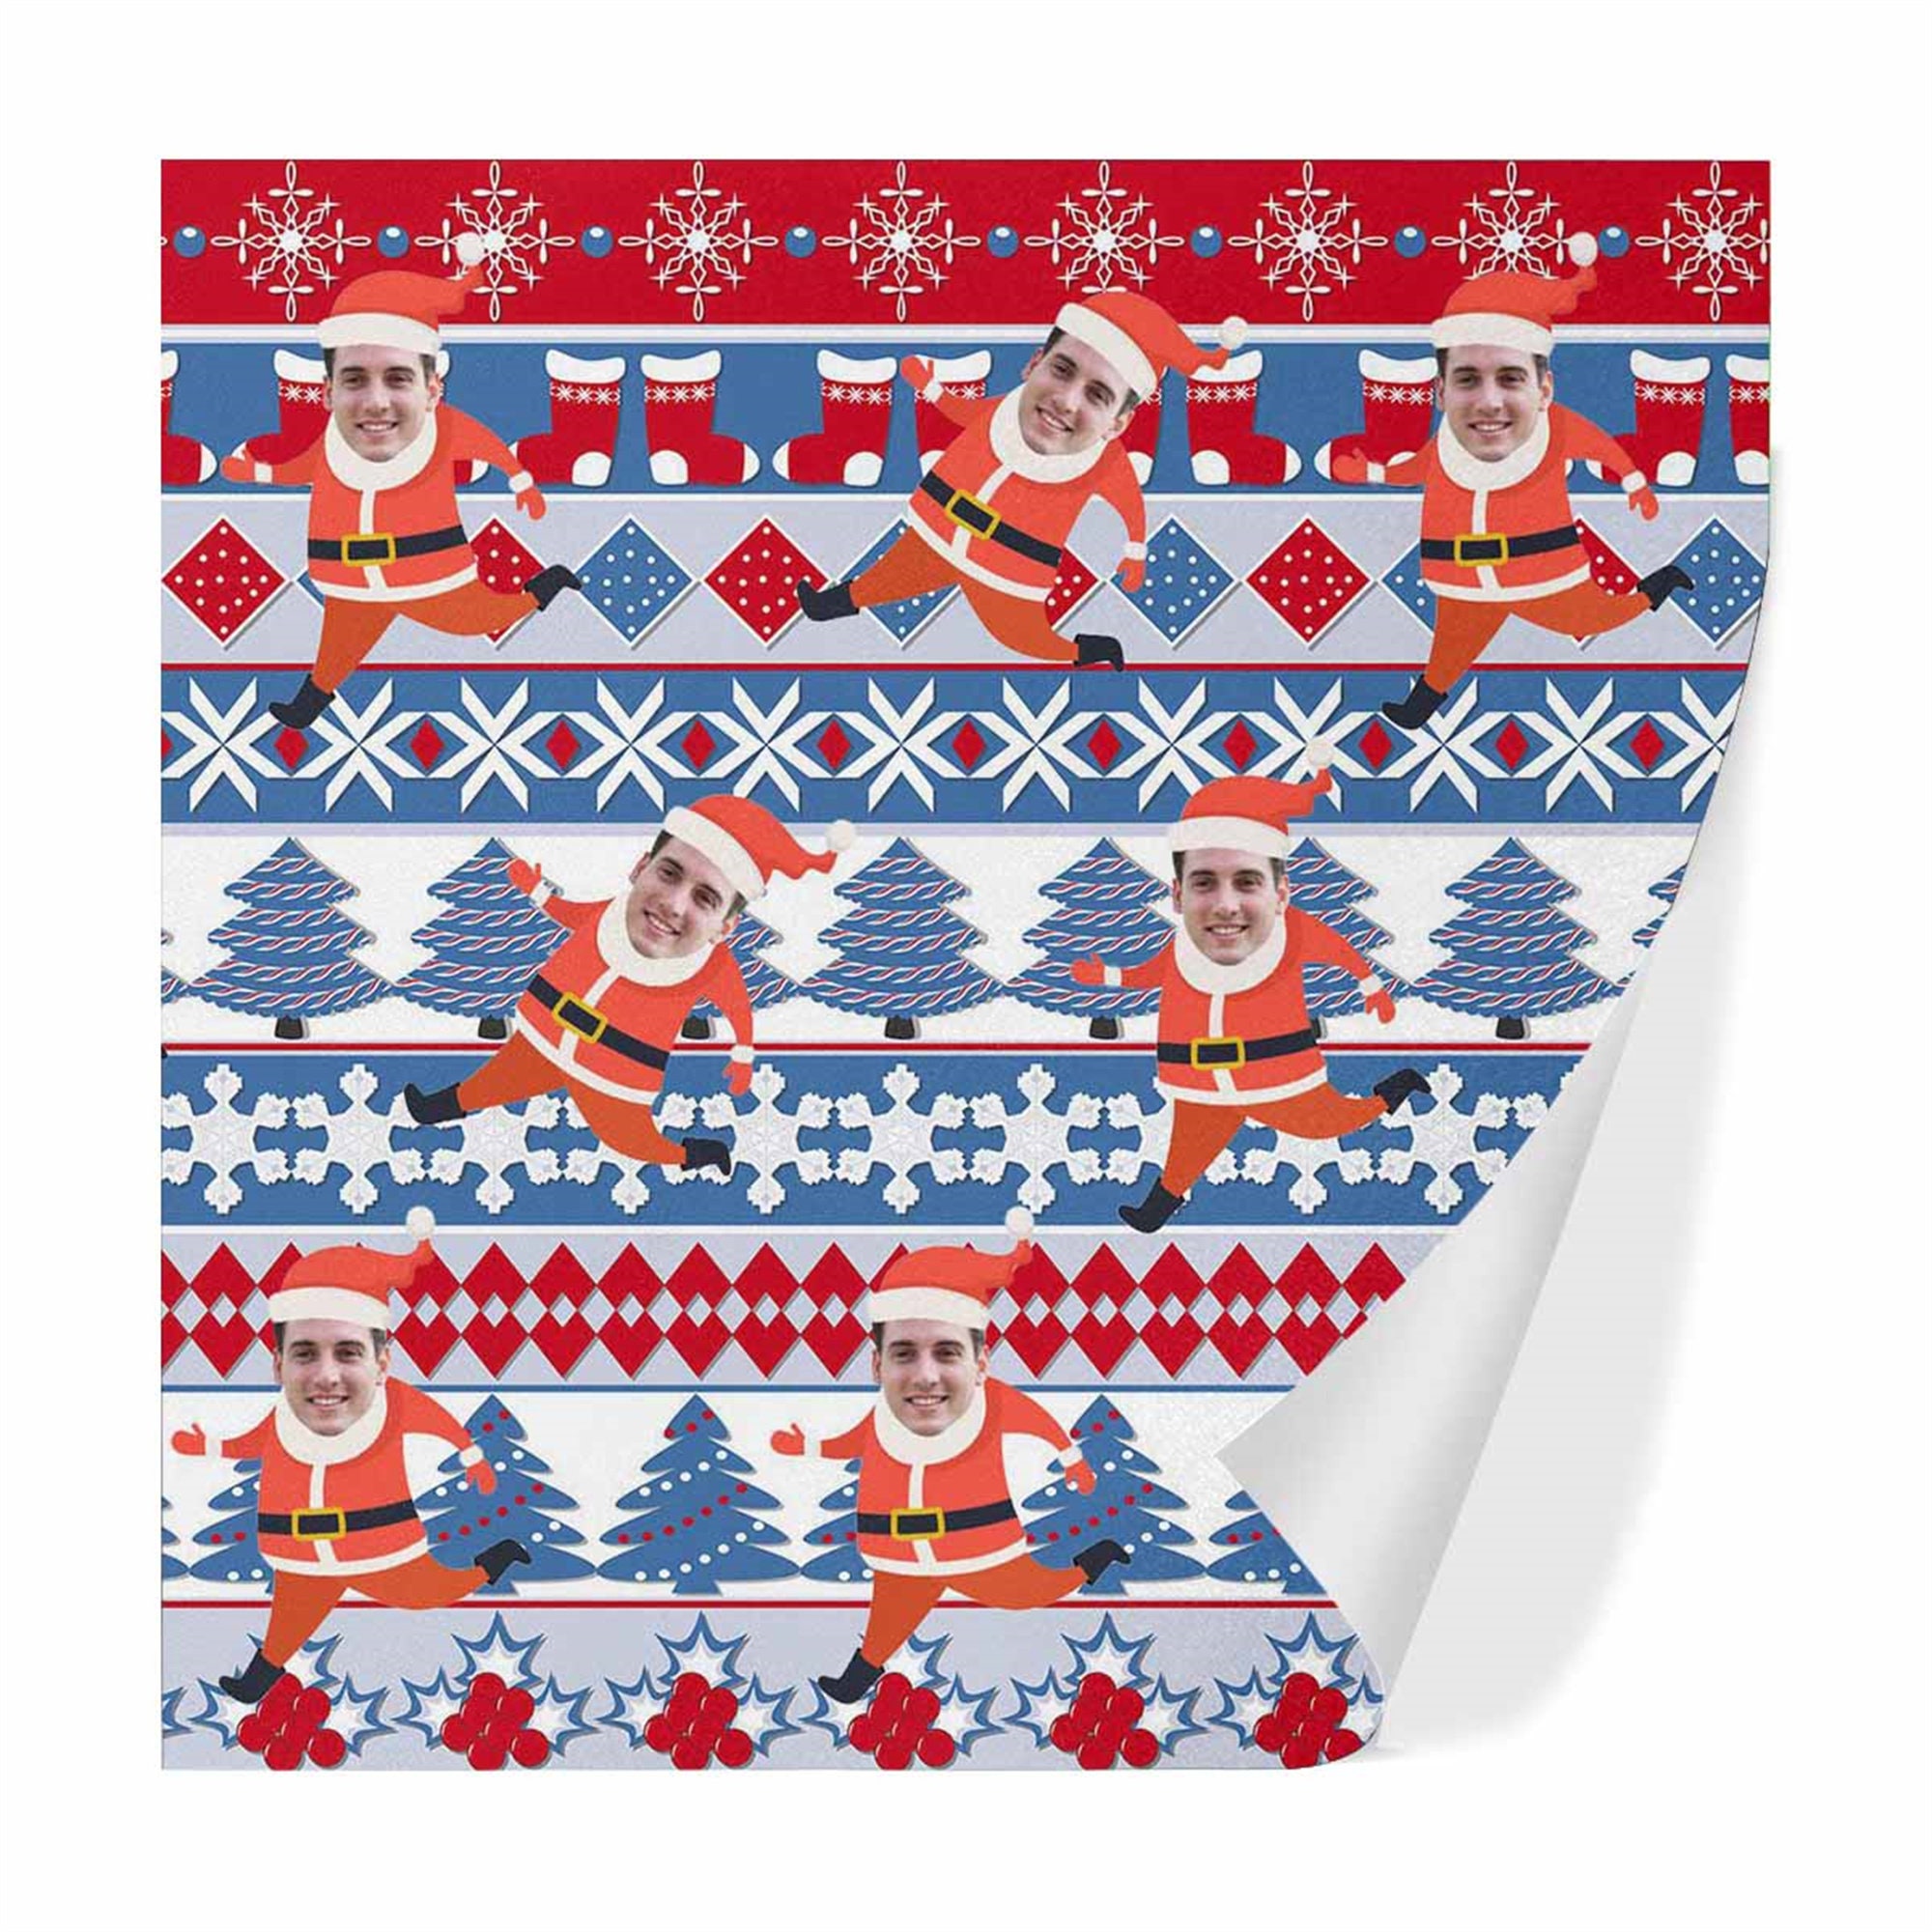  FnprtMo Christmas Wrapping Paper Clearance Blue Personalized Gift  Wrap Paper Birthday Girl Wrapping Paper Birthday Santa Claus Christmas  Wrapping Paper Set : Health & Household